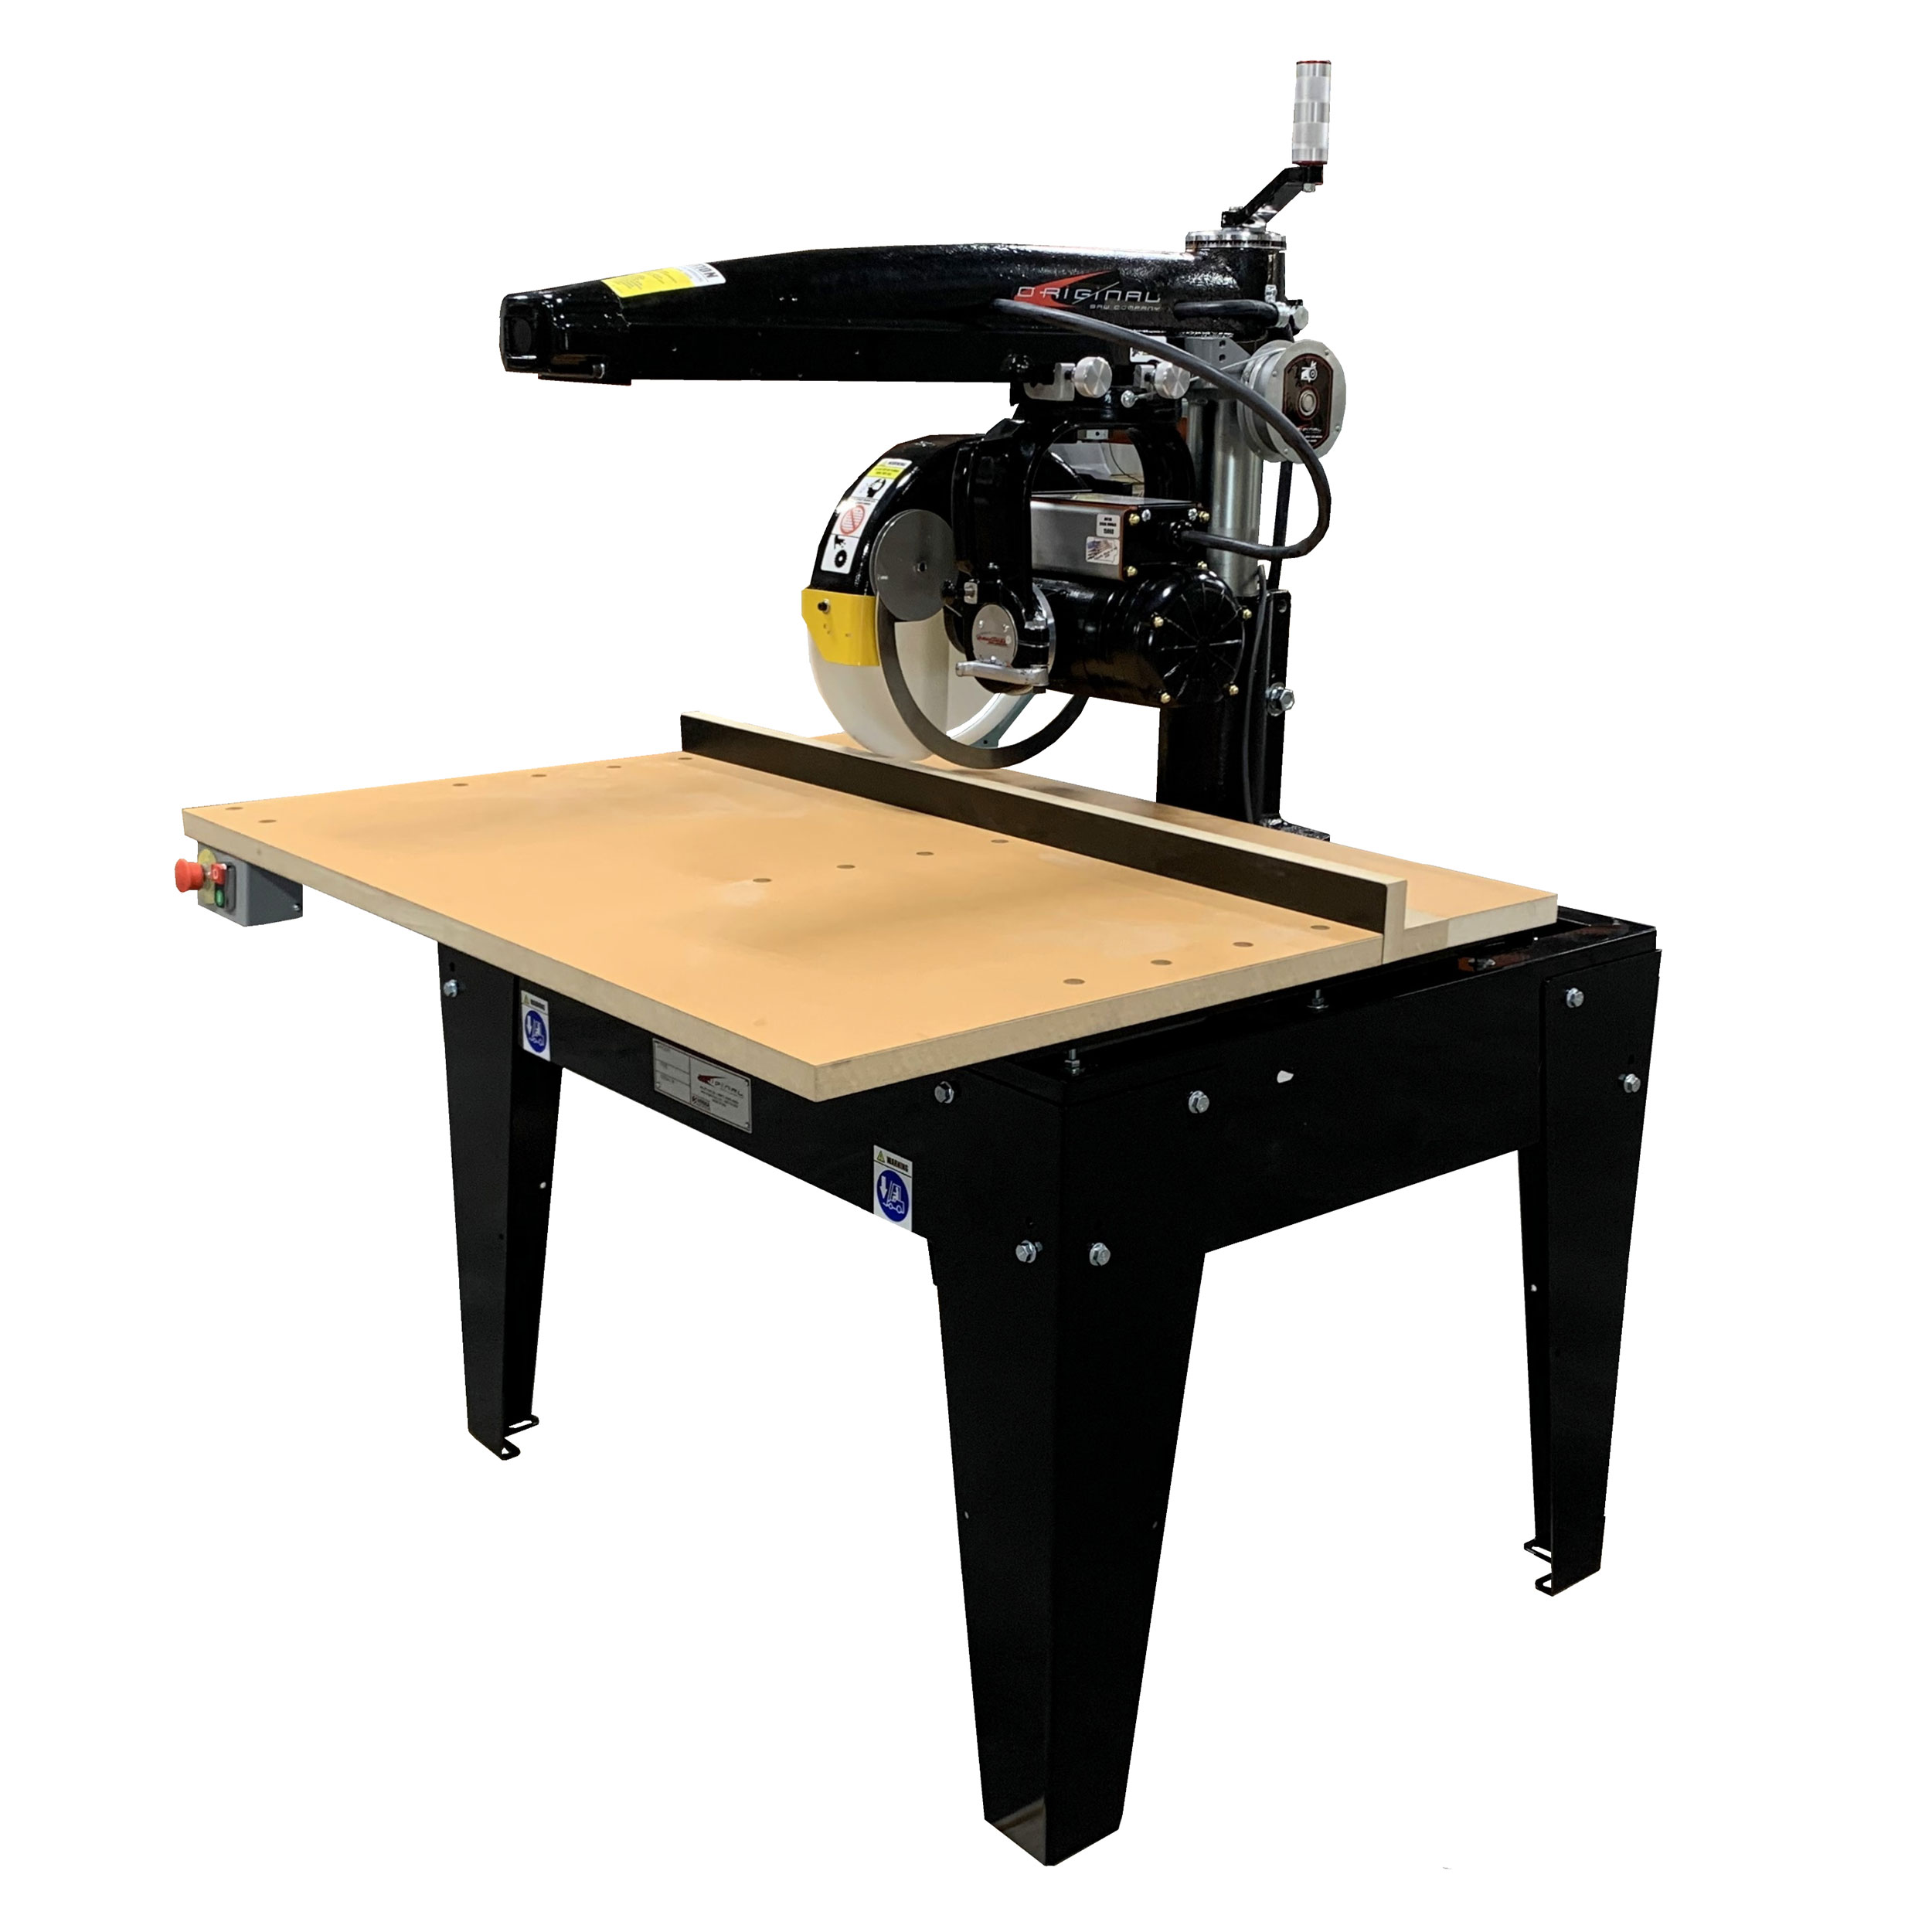 Radial Arm Saw With 16" Blade And 16" Crosscut, 5hp 3 Phase 208/230v